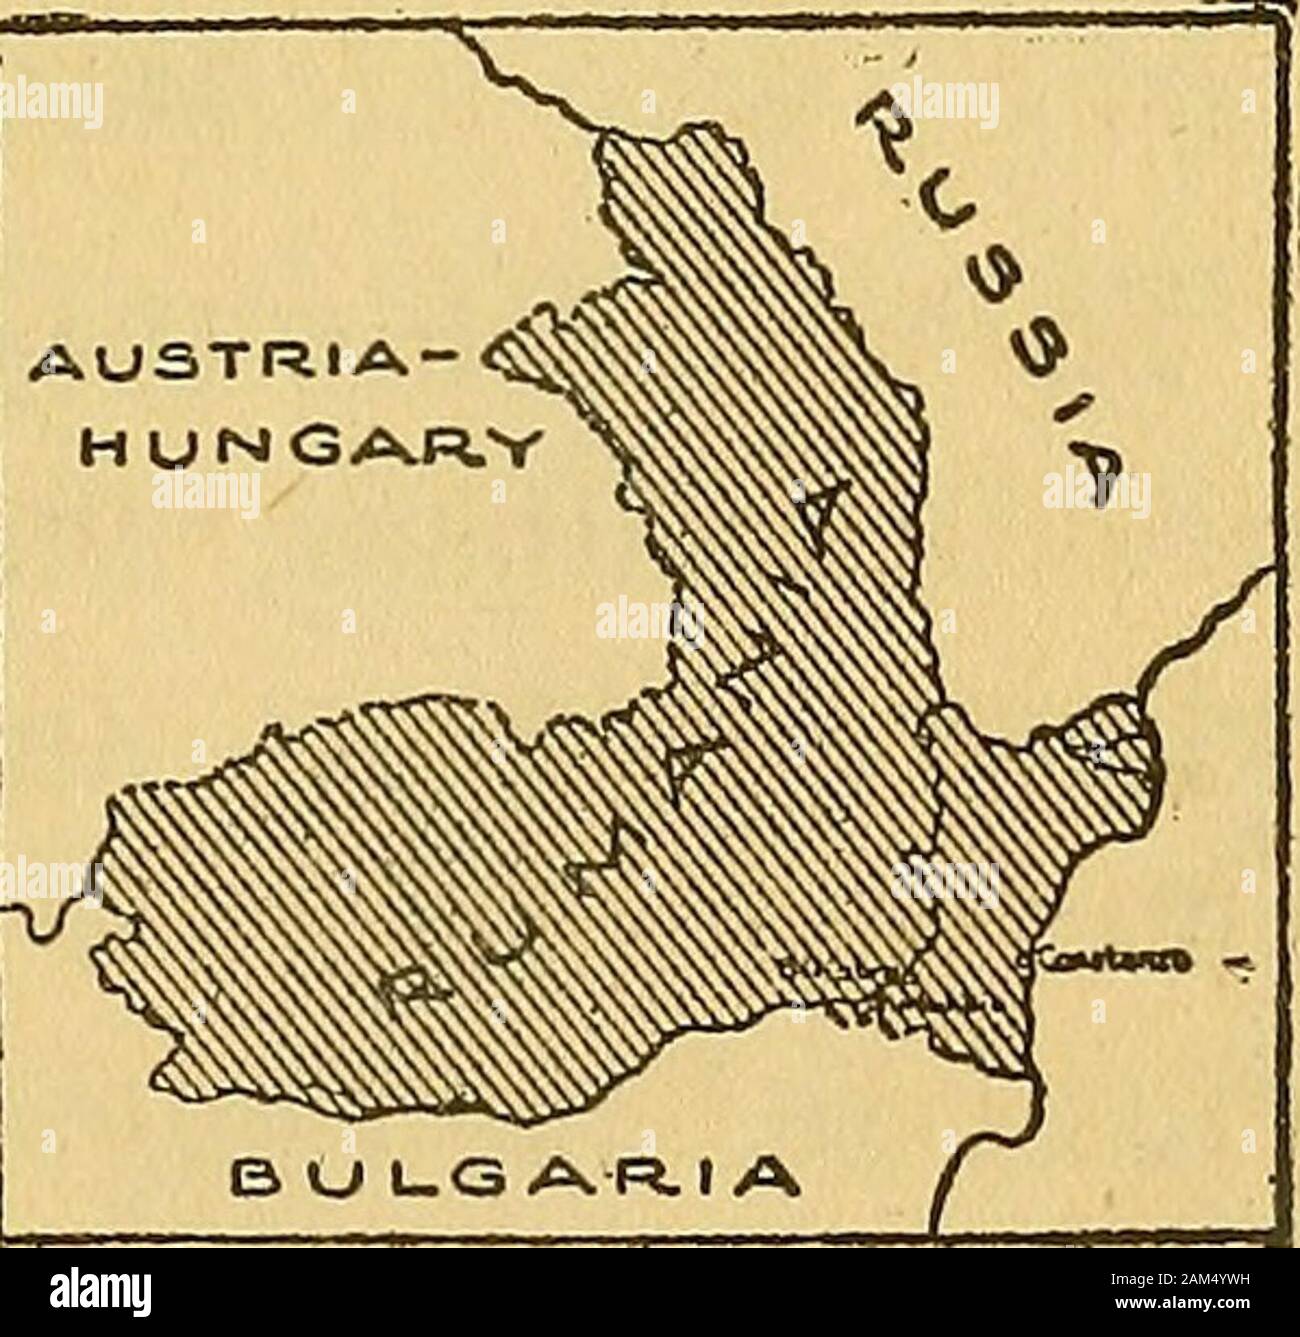 Rumania S Sacrifice Her Past Present And Future 1878 1913 R Us Sia Austria 1 Mungar V Y B U Uo Apil A R B U Ua Ar I A Rumanias Territory At Different